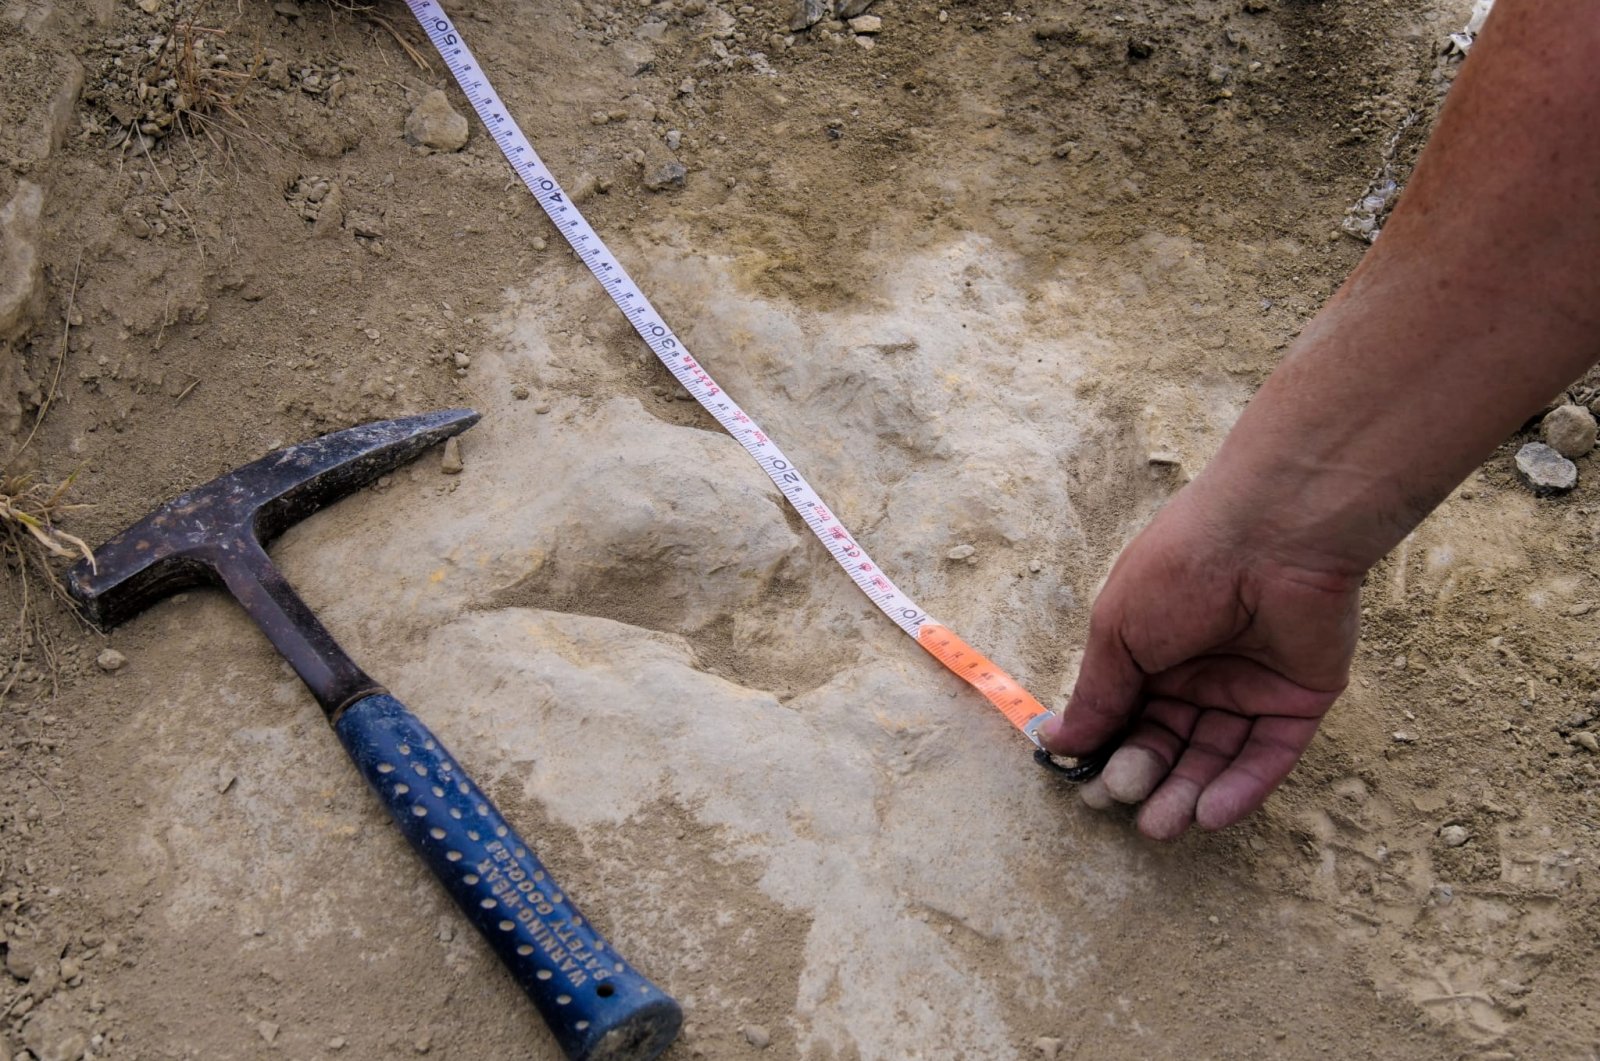 Researchers measure a fossilized dinosaur footprint made about 120 million years ago during the Cretaceous Period during field work in the La Rioja region, in northern Spain, in this undated handout picture. (Alberto Labrador via Reuters)